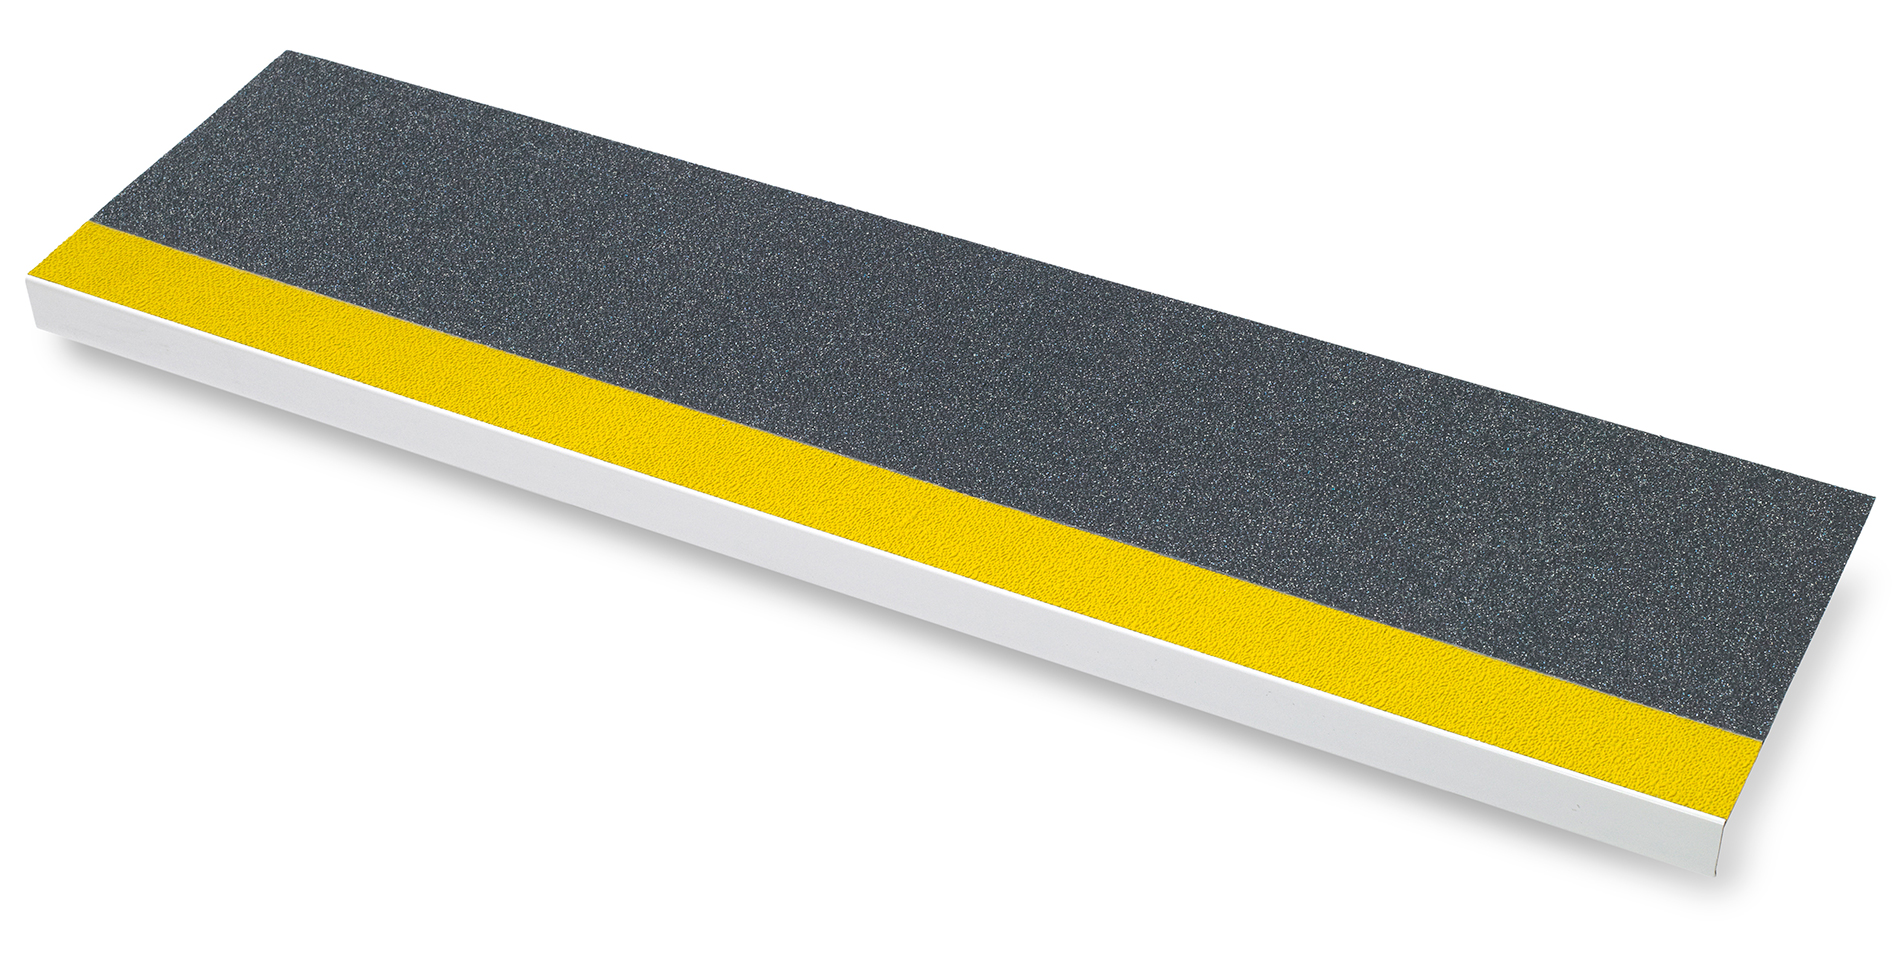 Astra step-covering in black with yellow nosing